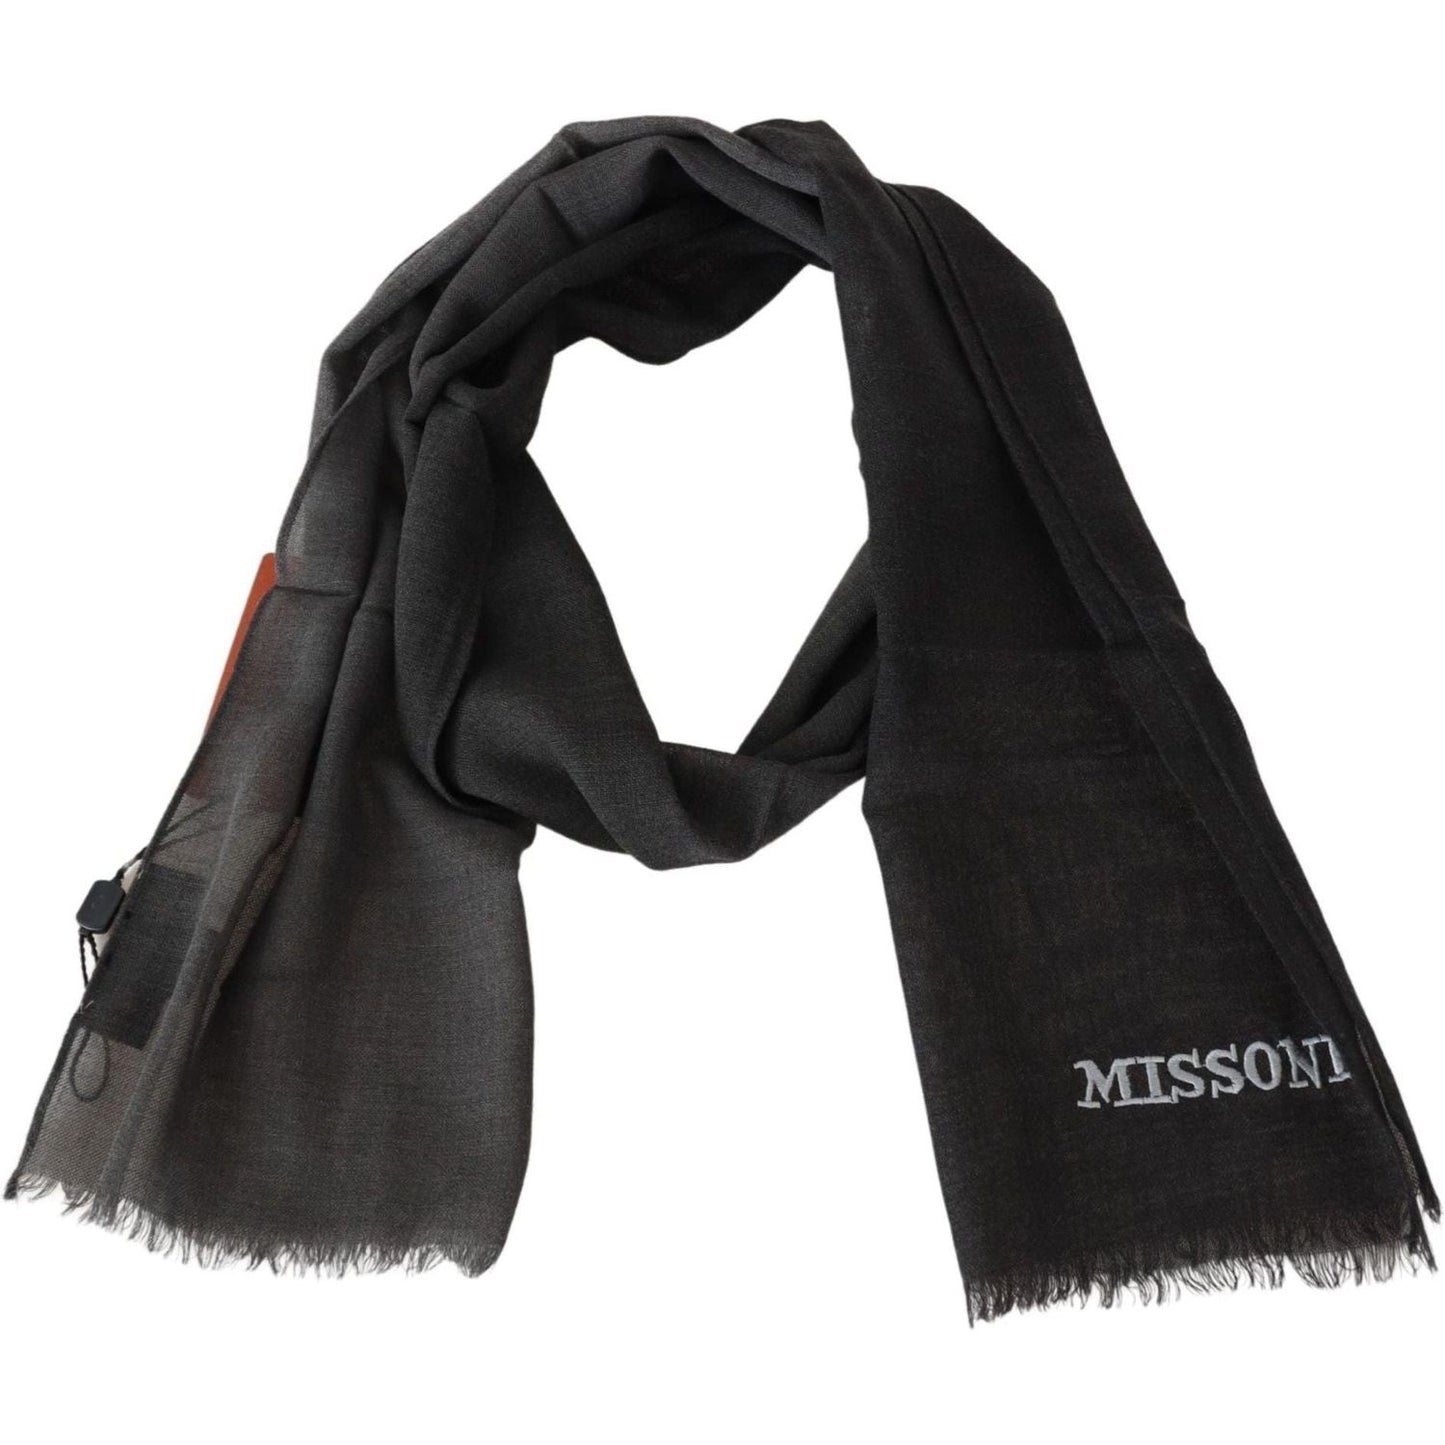 Elegant Black Wool Scarf with Embroidered Logo